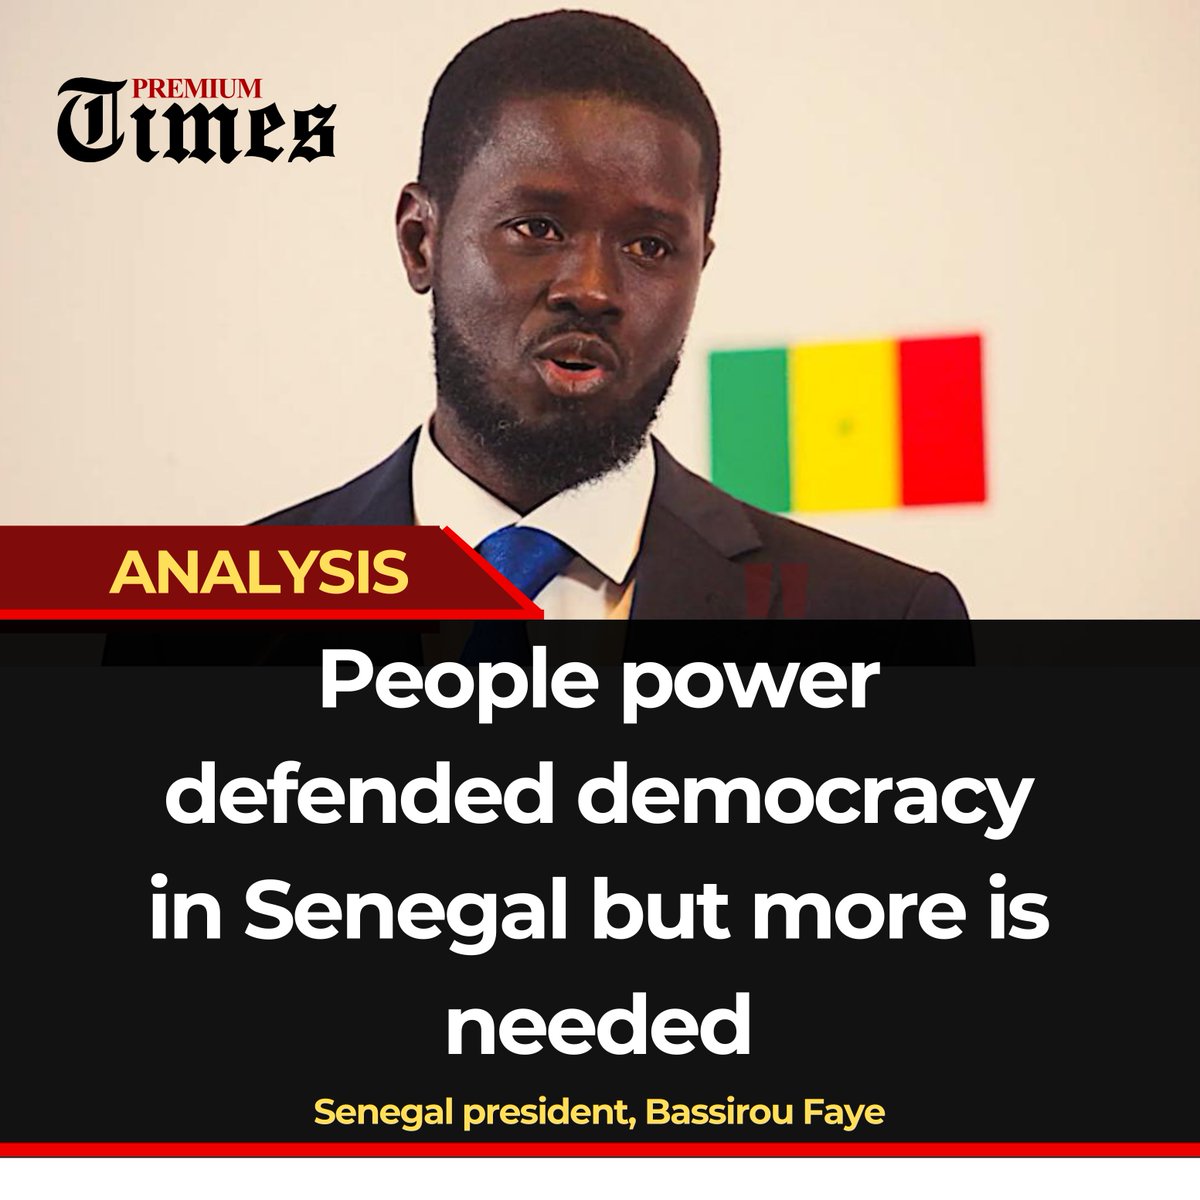 After three tumultuous years, Senegal’s presidential elections in March saw Bassirou Faye elected to lead the country. The political crisis was linked to uncertainty about whether former president Macky Sall would contest for a third term, due to varying interpretations of the…